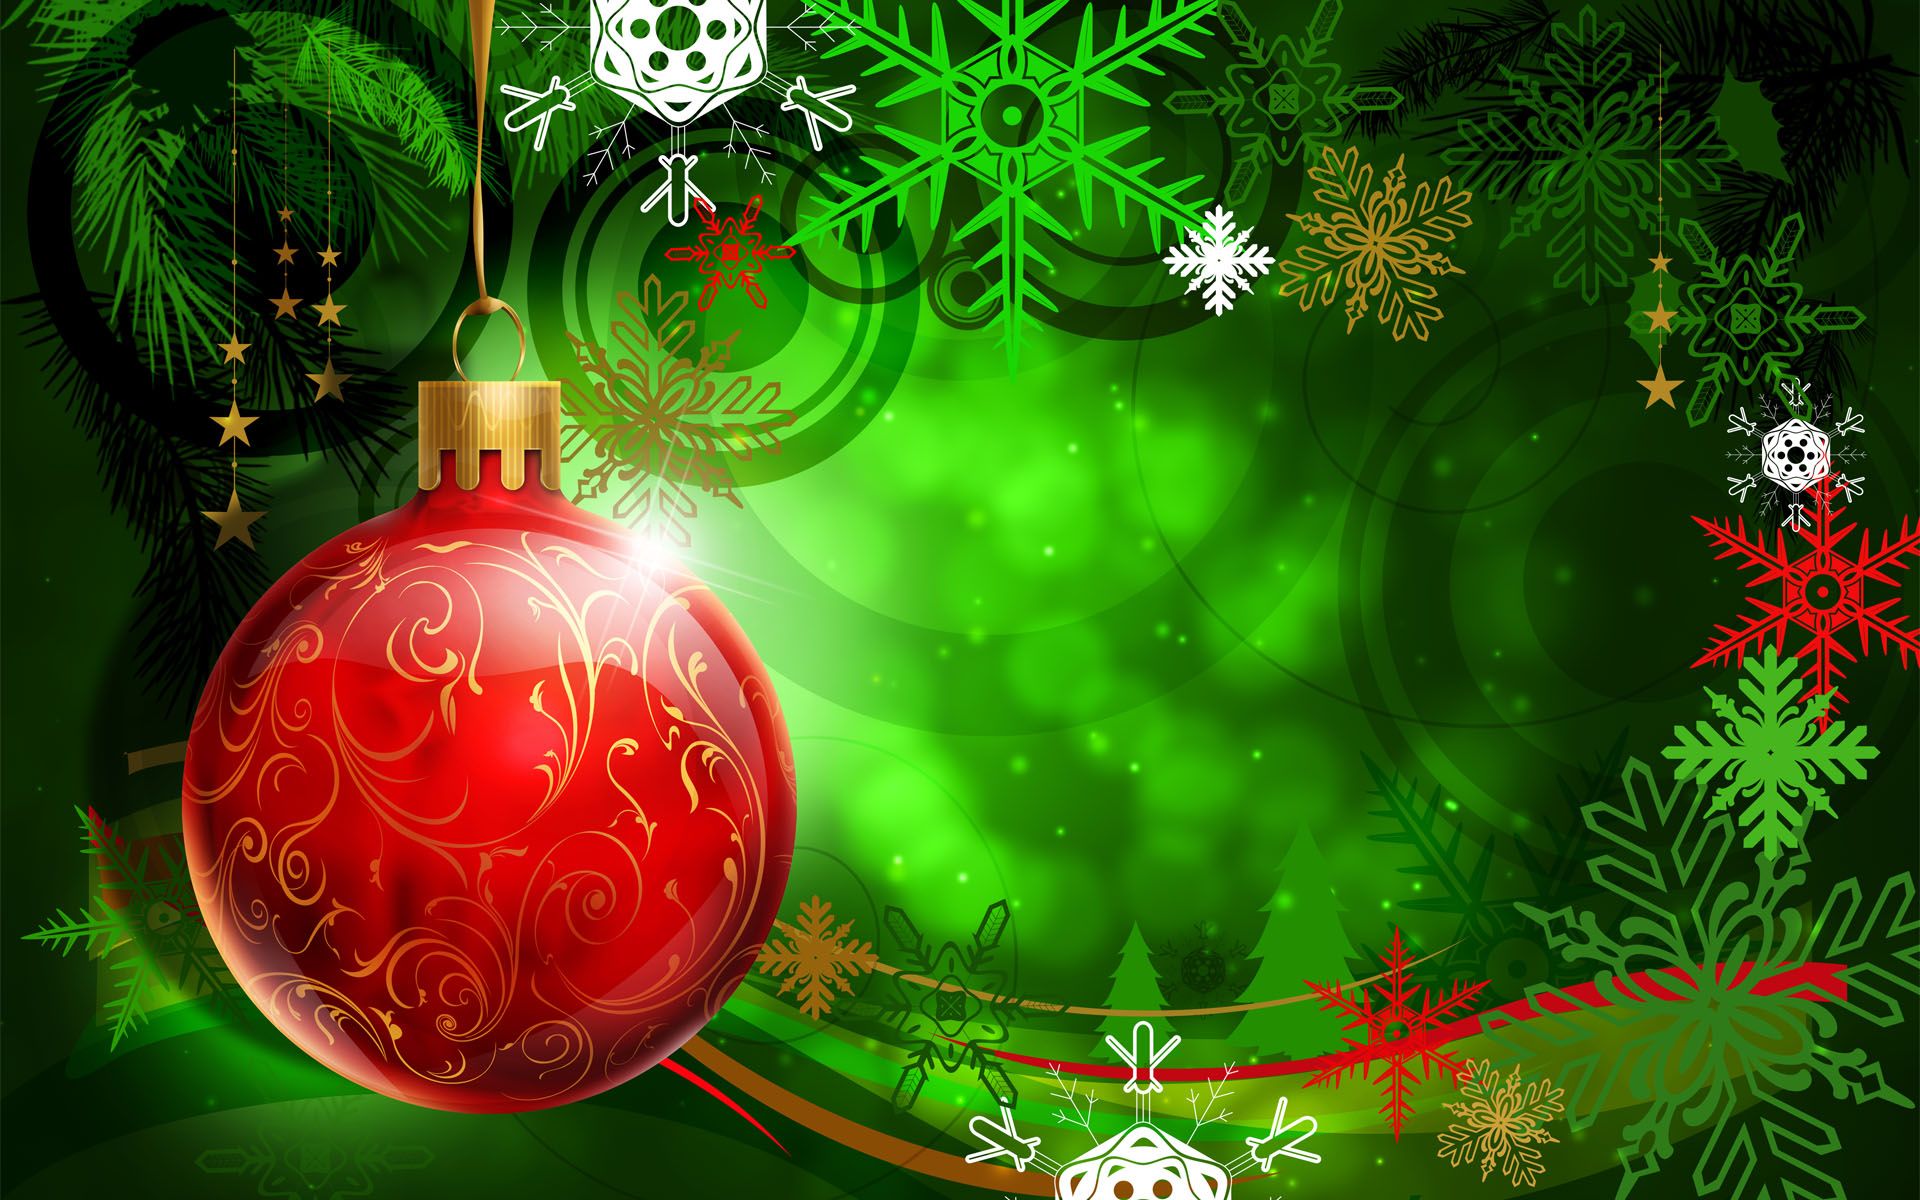 Christmas Wallpaper Backgrounds - HD Wallpapers Backgrounds of ...